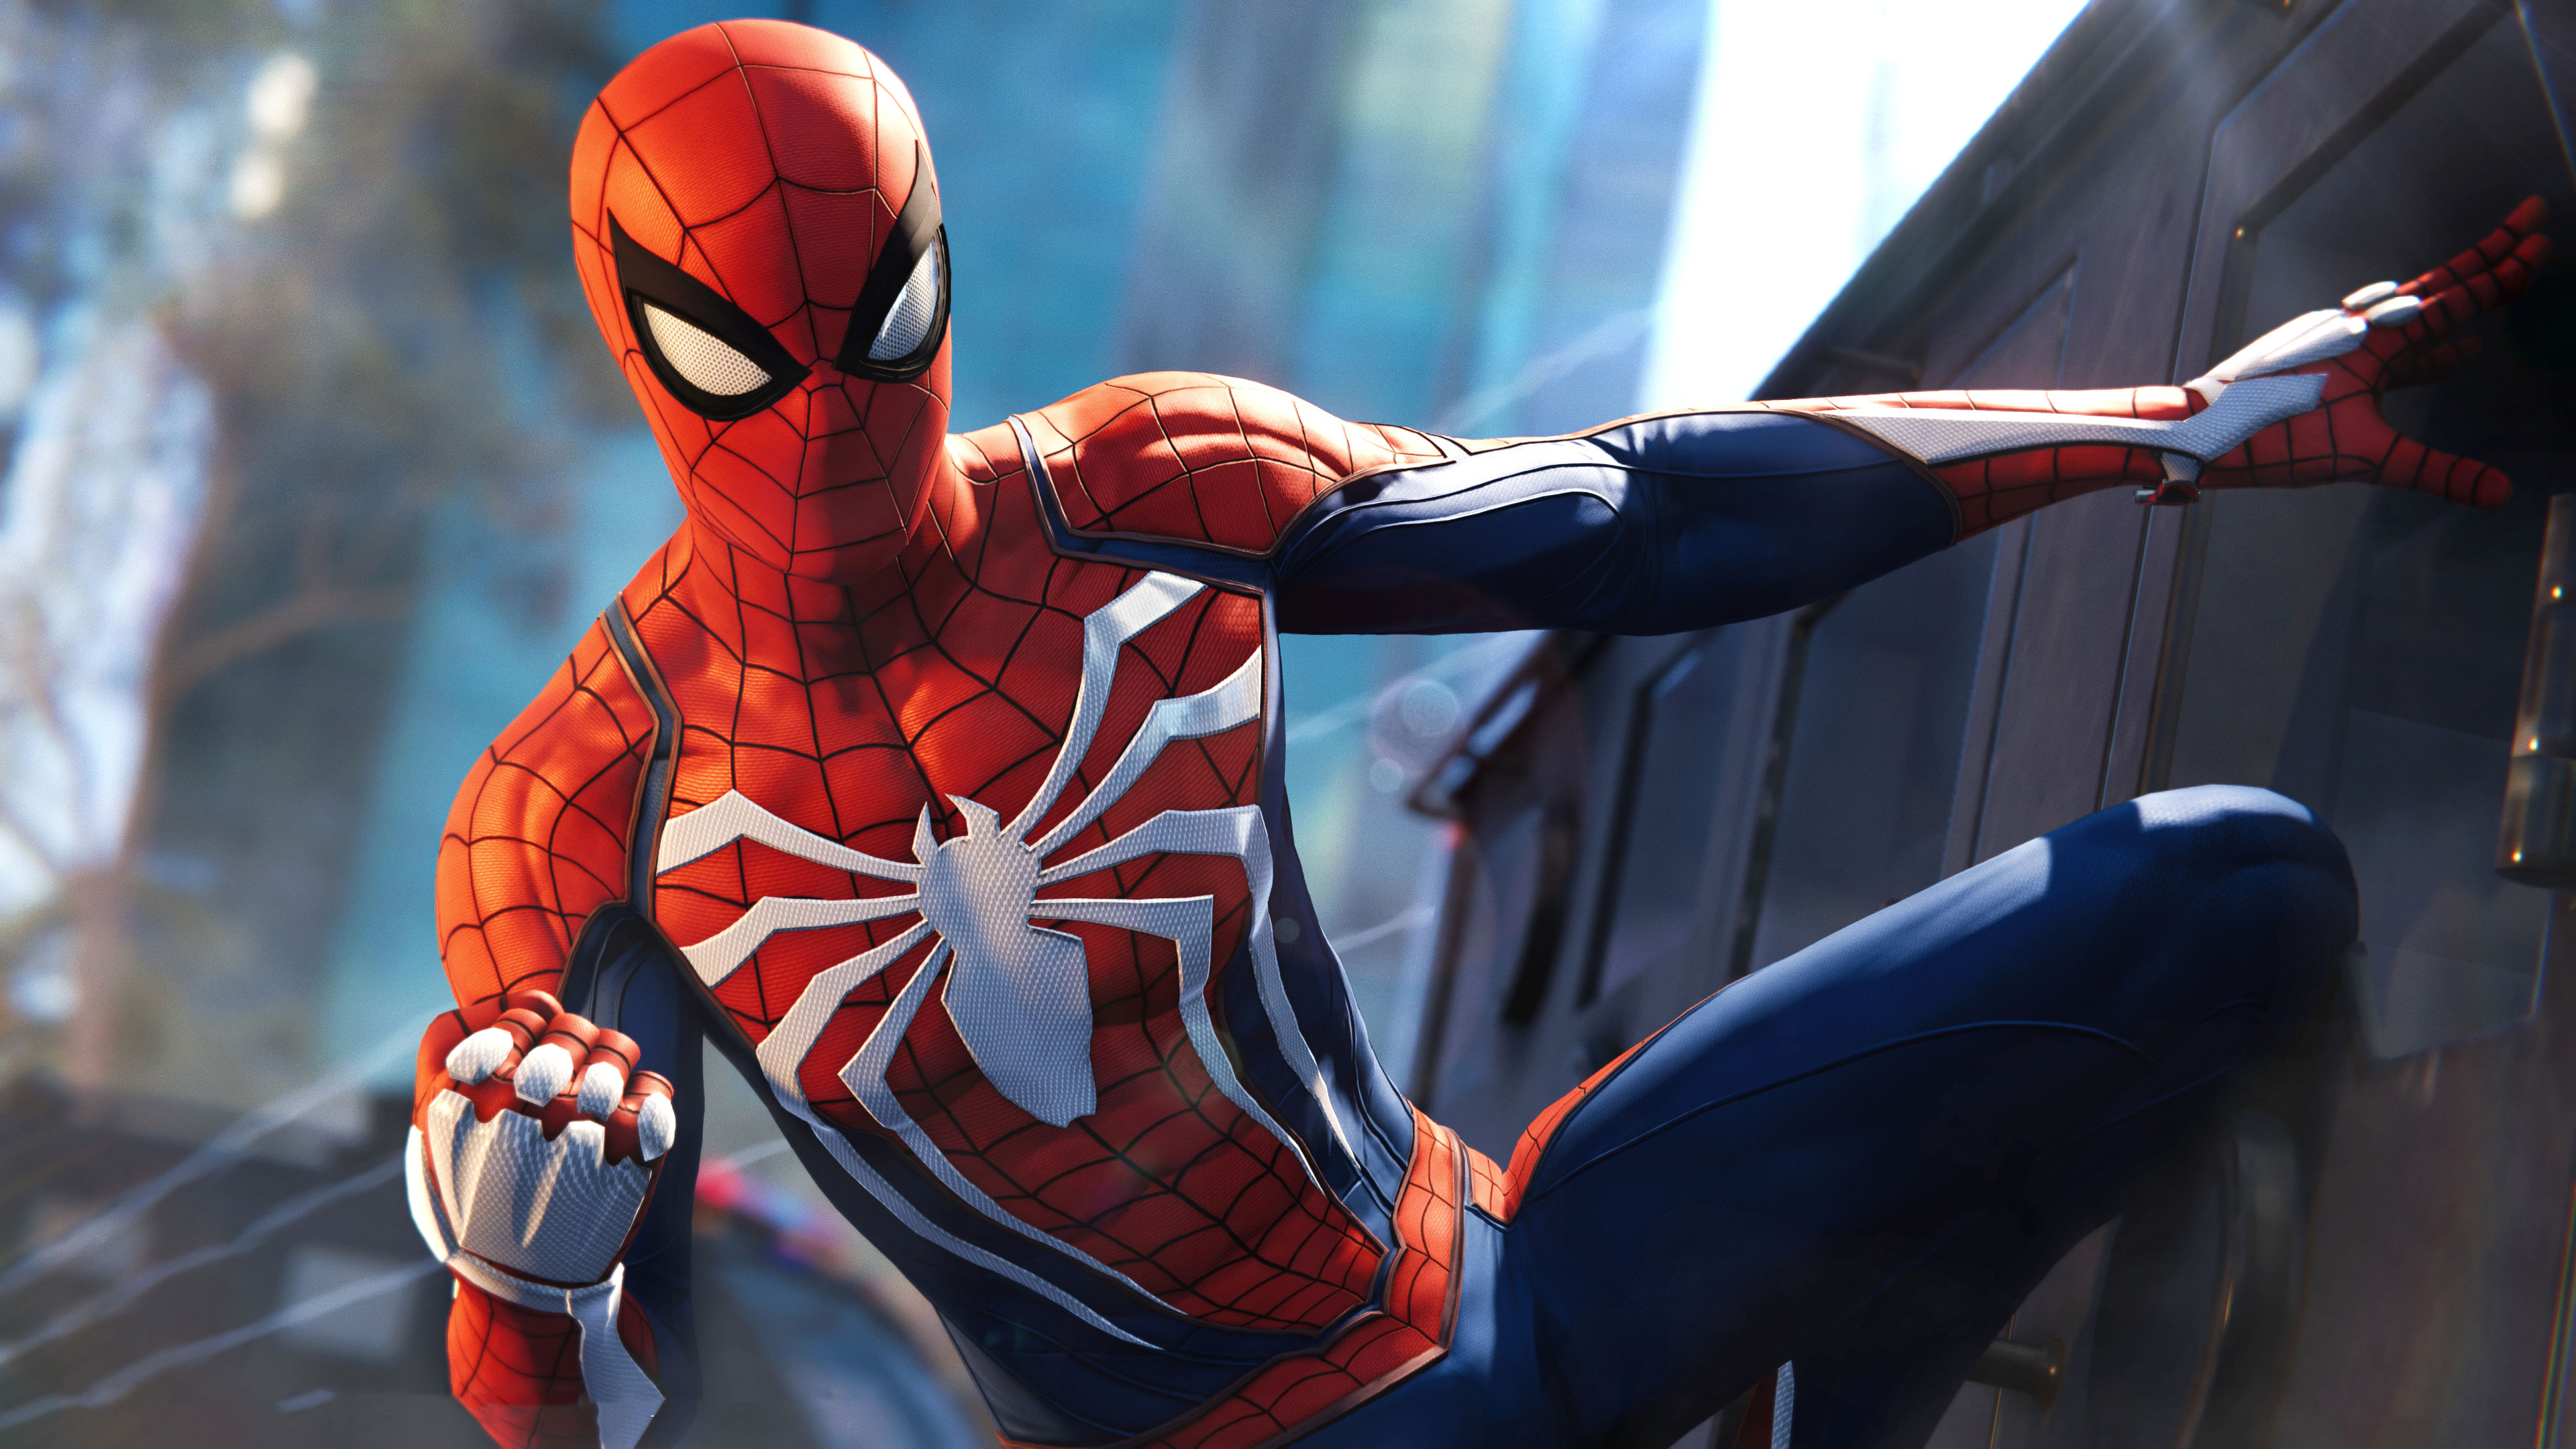 Marvel spider man game for pc download free